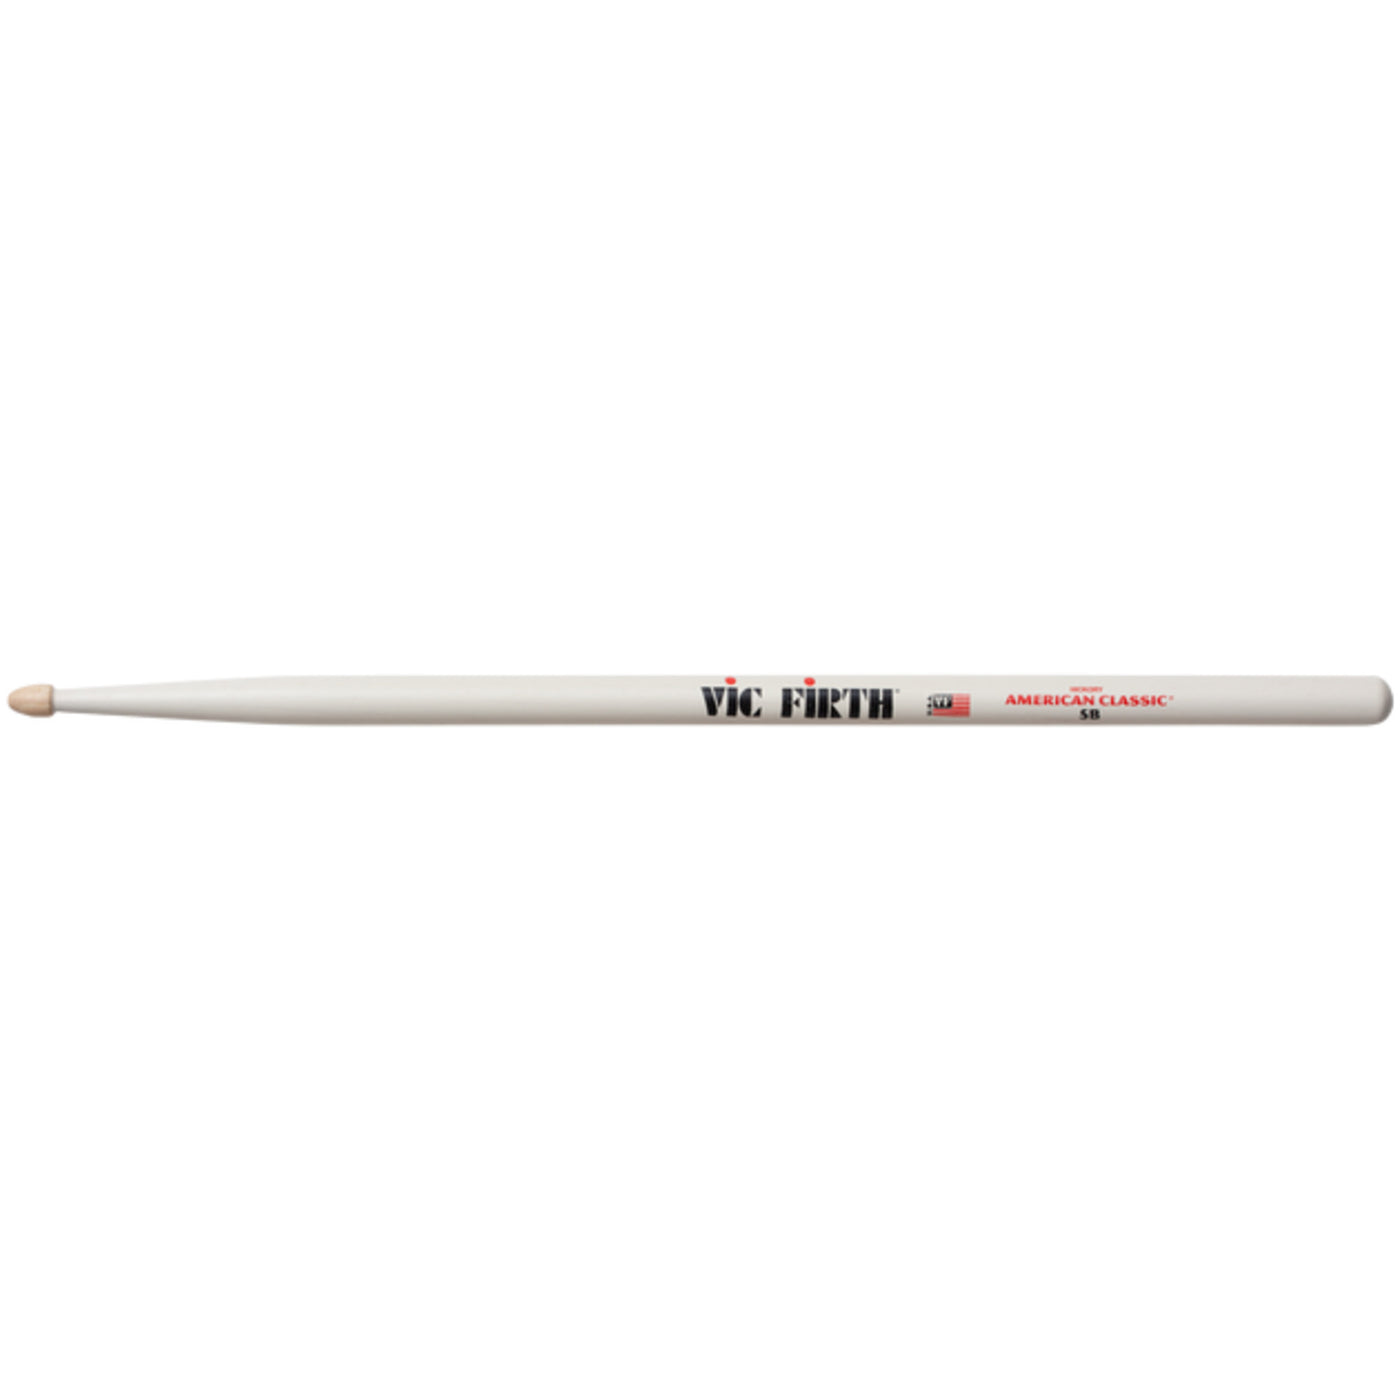 Vic Firth American Classic 5B with White Finish Drumstick (5BW)